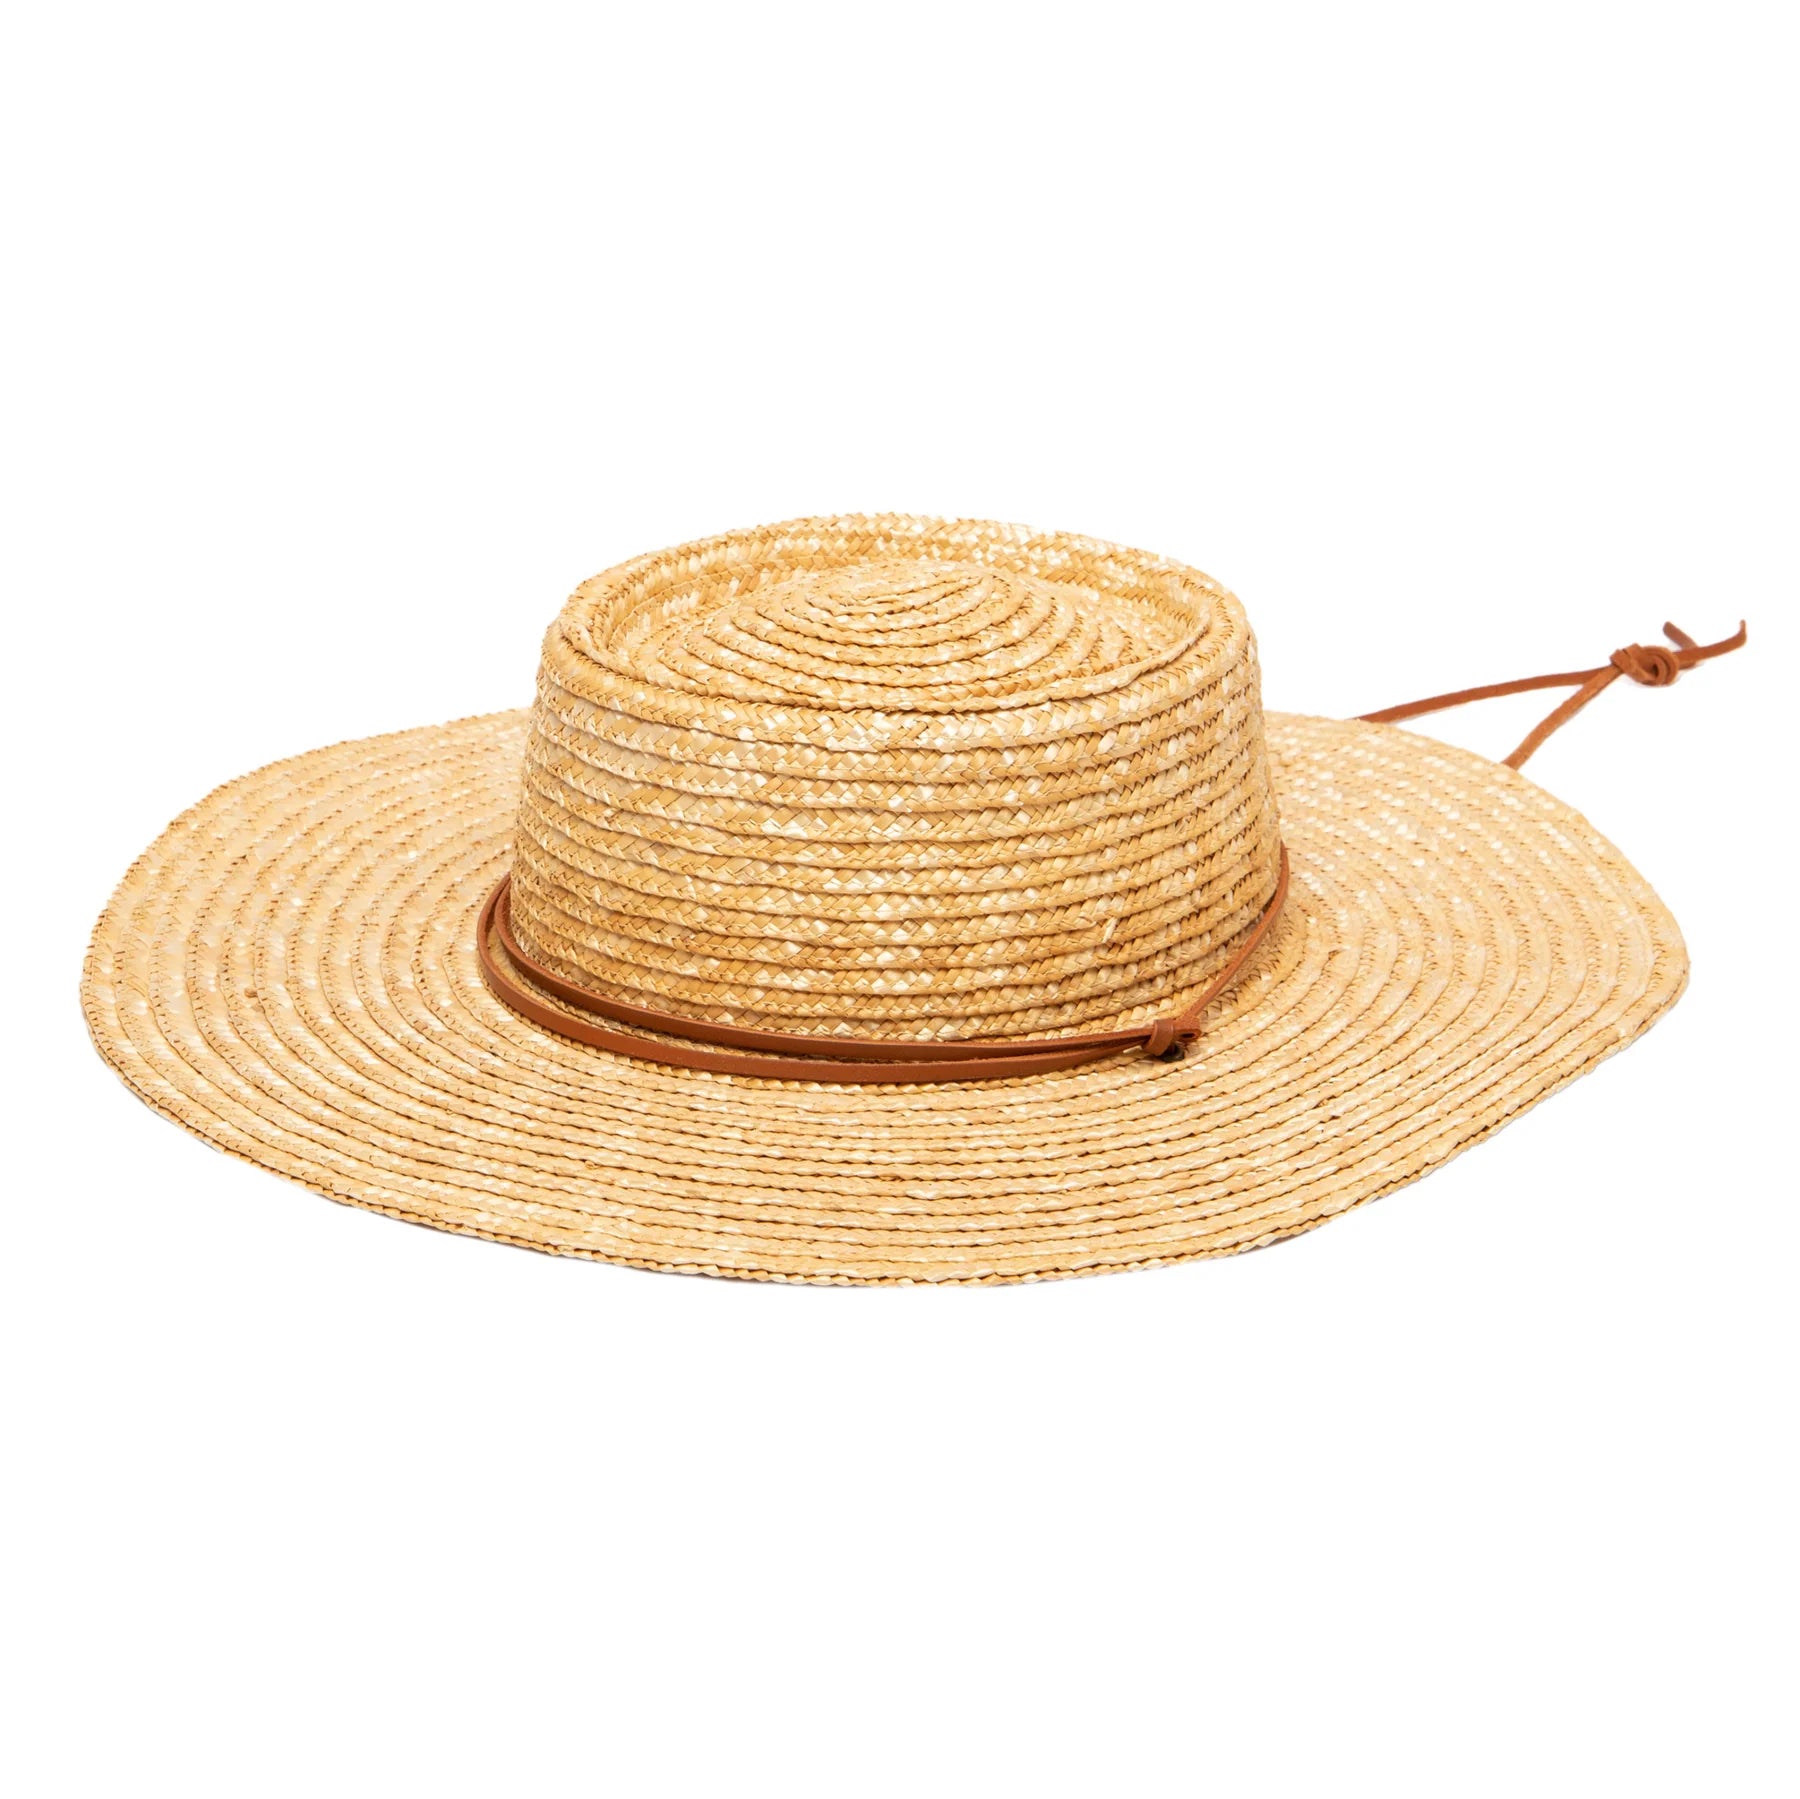 Women's Wheat Straw Hat with Leather Chin Cord